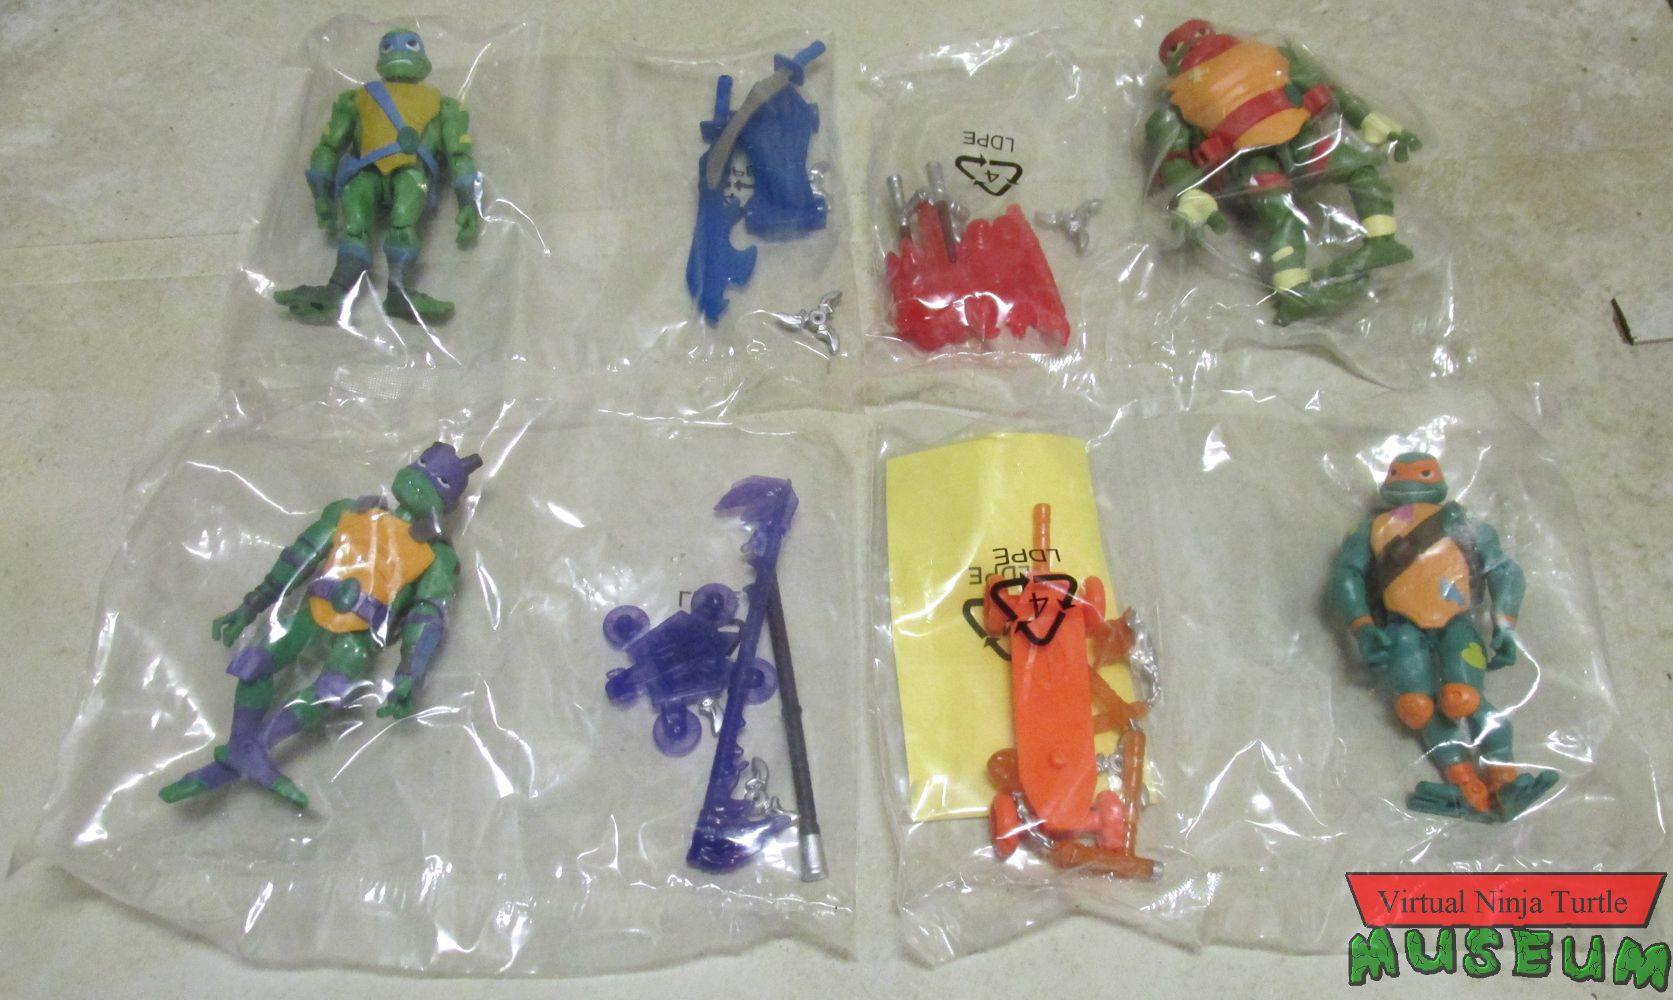 Figures with accessories